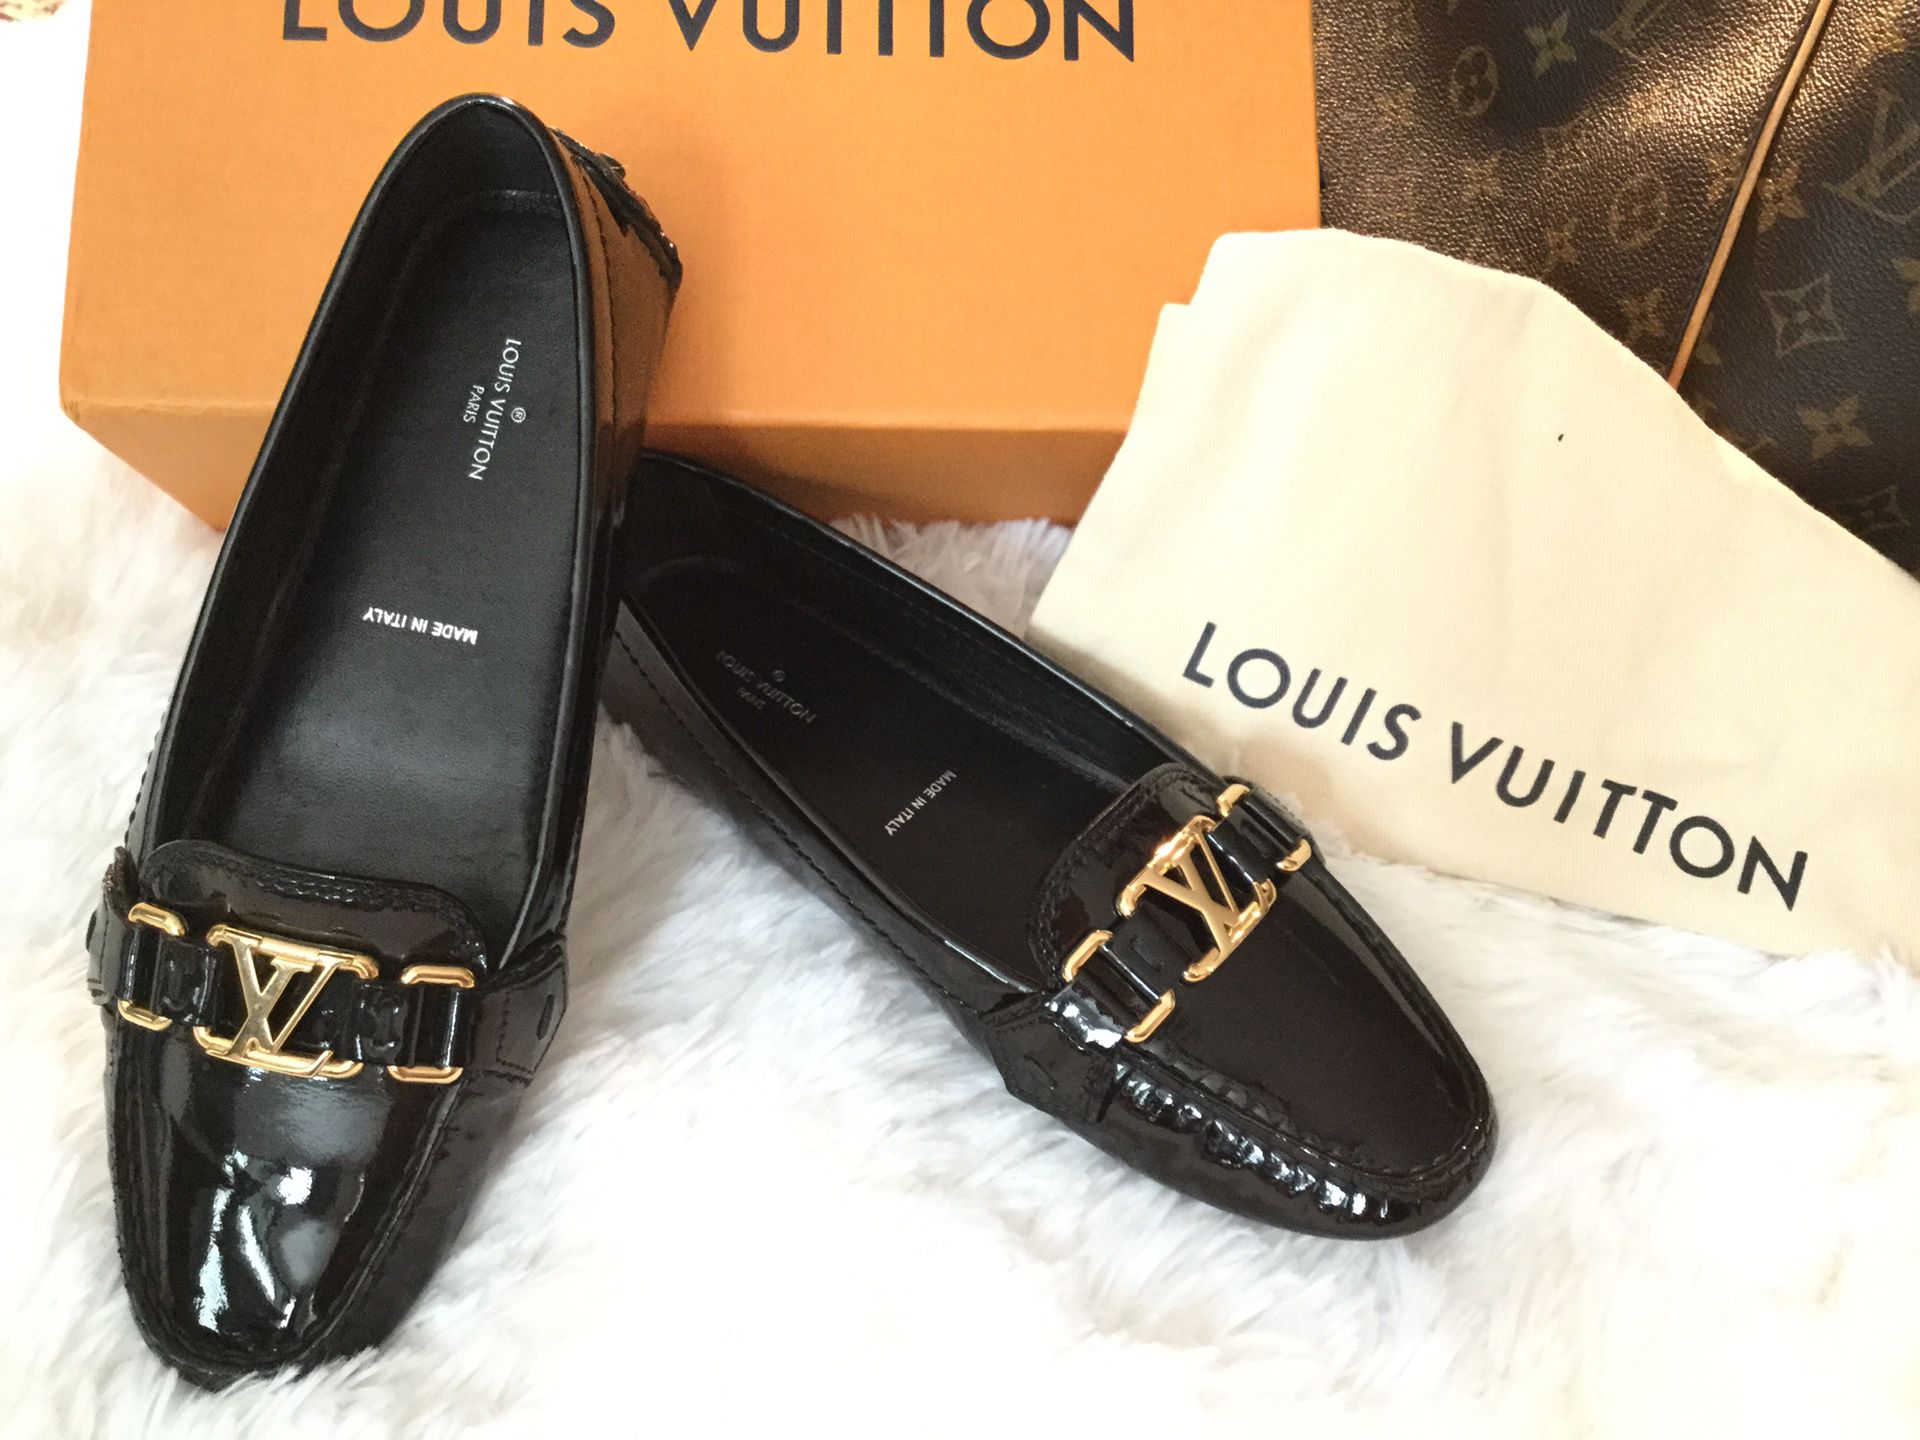 LOUIS VUITTON BLACK FLAT PATENT LEATHER SIZE: 37 almost new